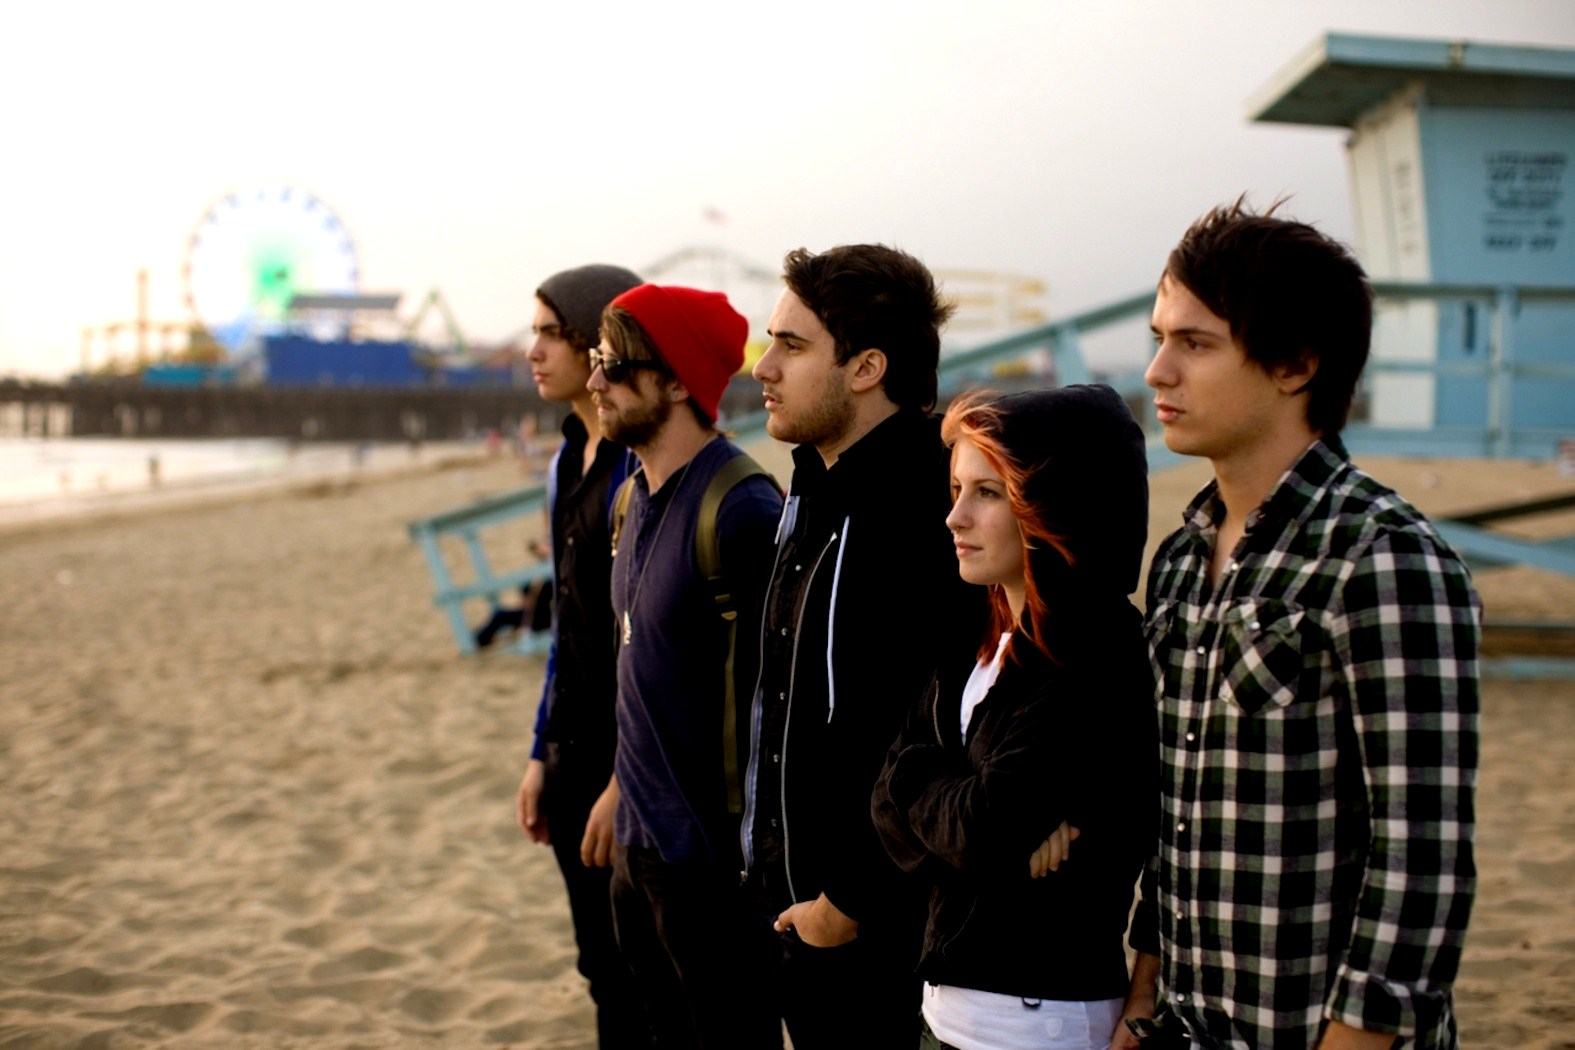 Hd Paramore Wallpaper For Background, Machelle Rummel - Paramore On The Beach - HD Wallpaper 